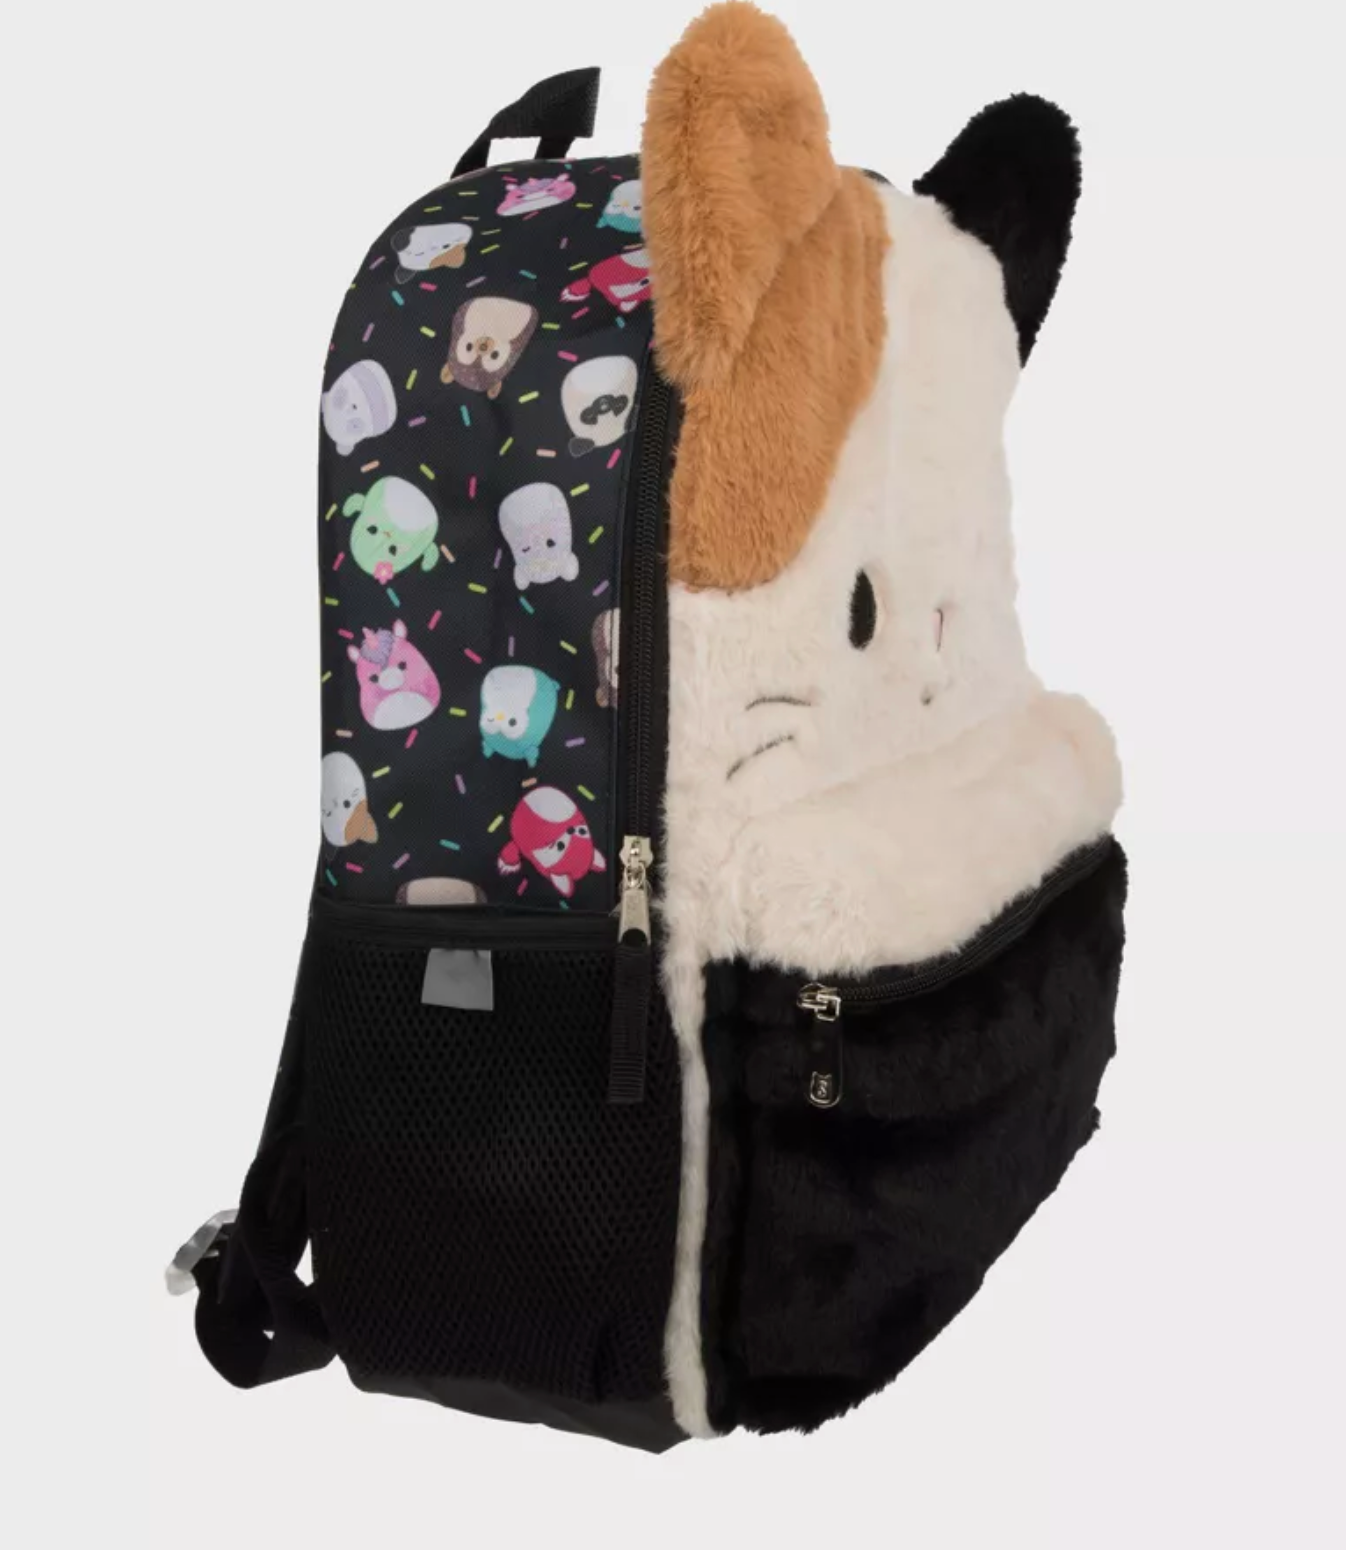 Squishmallows 16in Kitty Black Backpack for Kids New with Tag